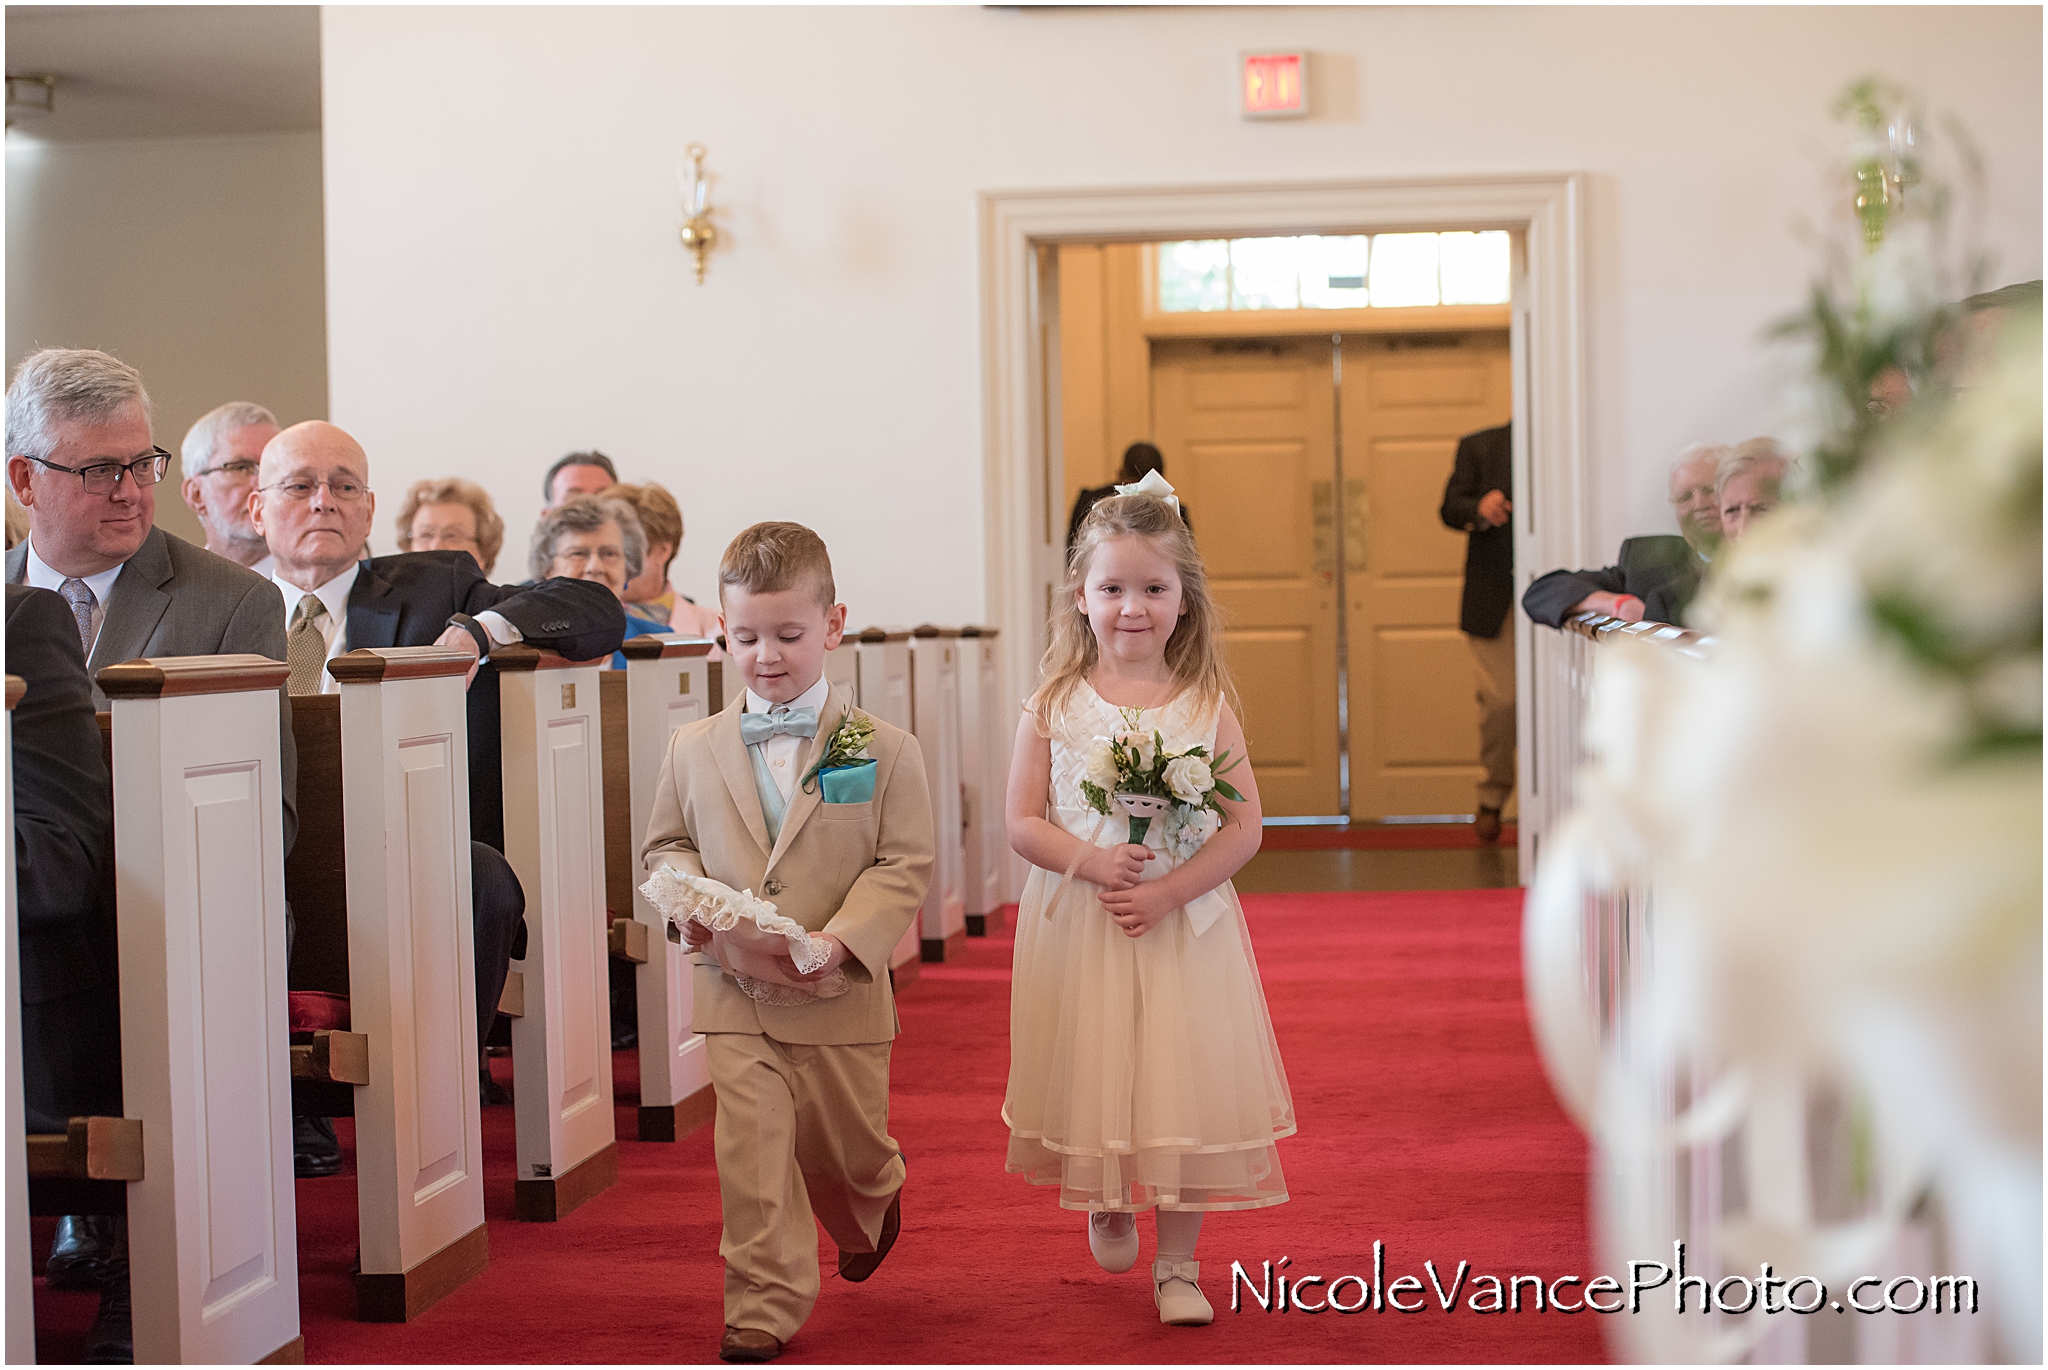 The flower girl and ring bearer process at Crestwood Presbyterian Church in Chesterfield VA.